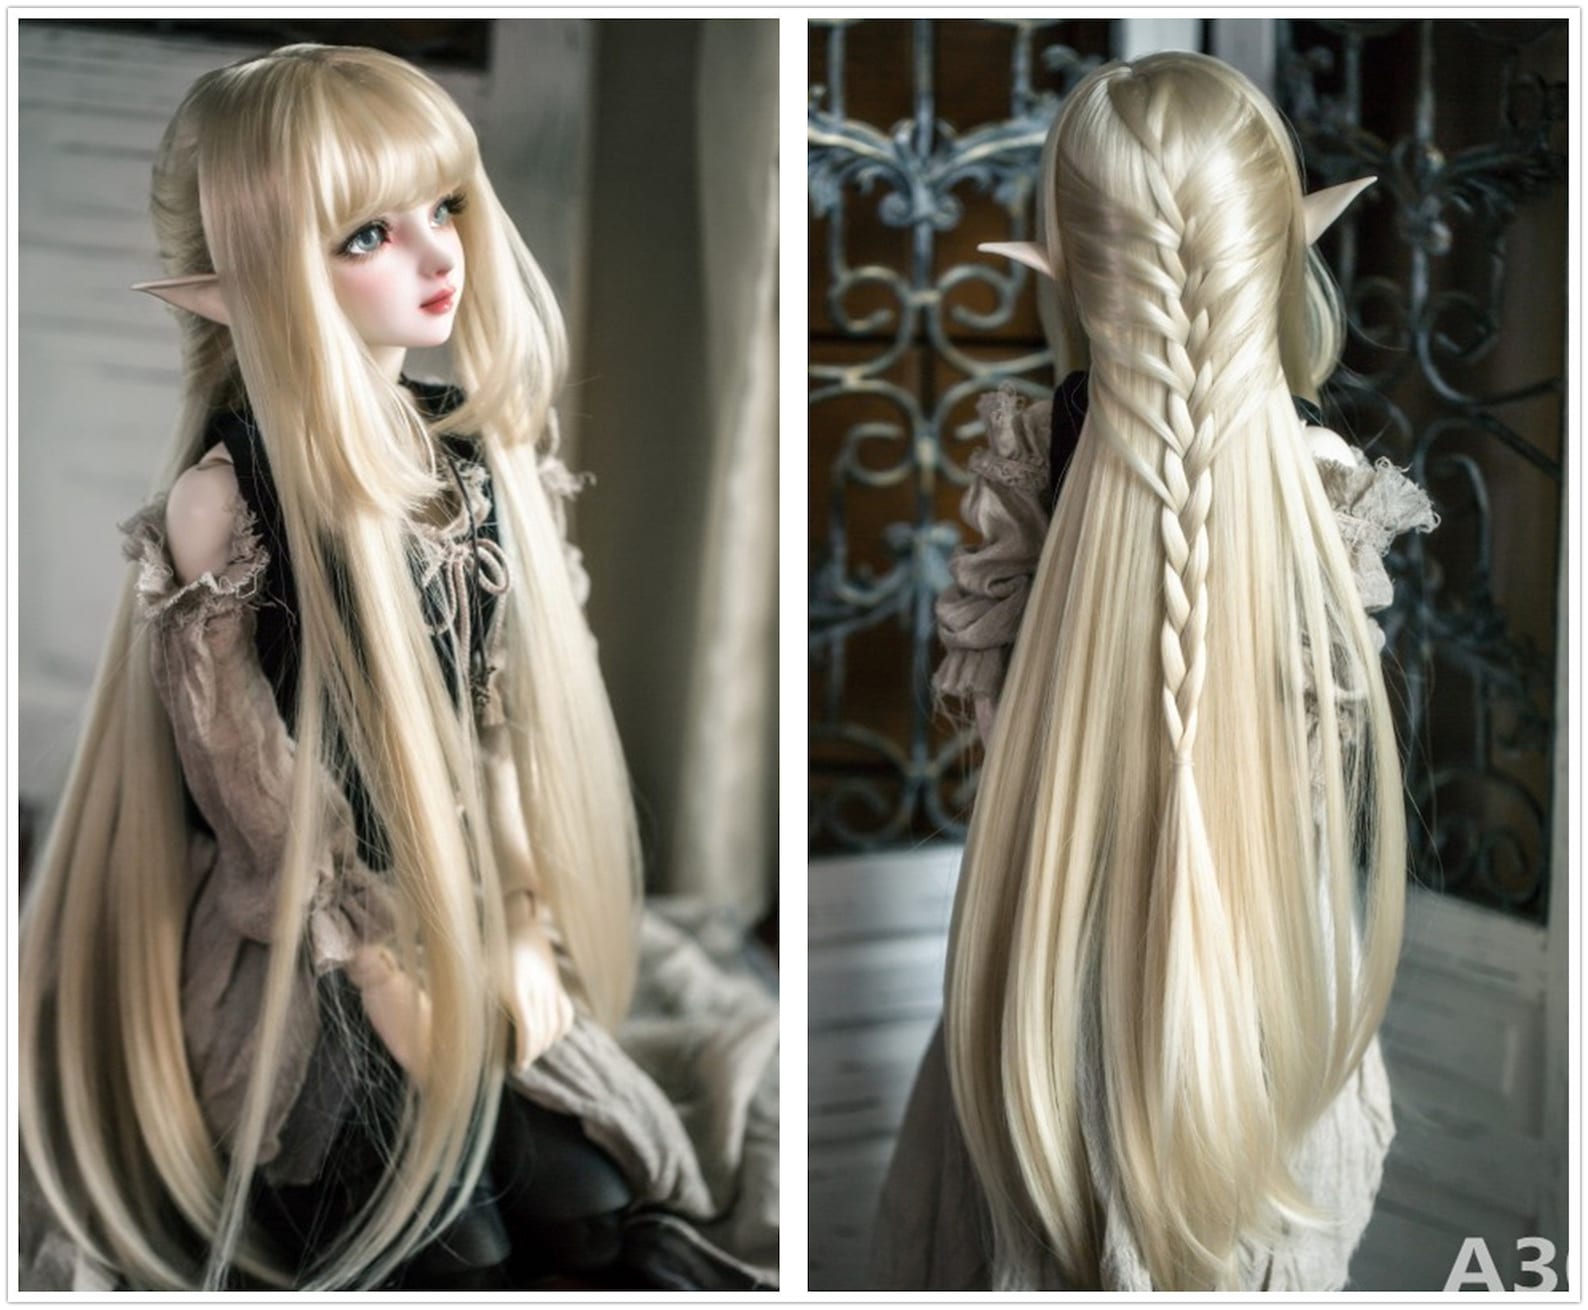 1. "BJD Doll with Long Blonde Hair" - wide 7